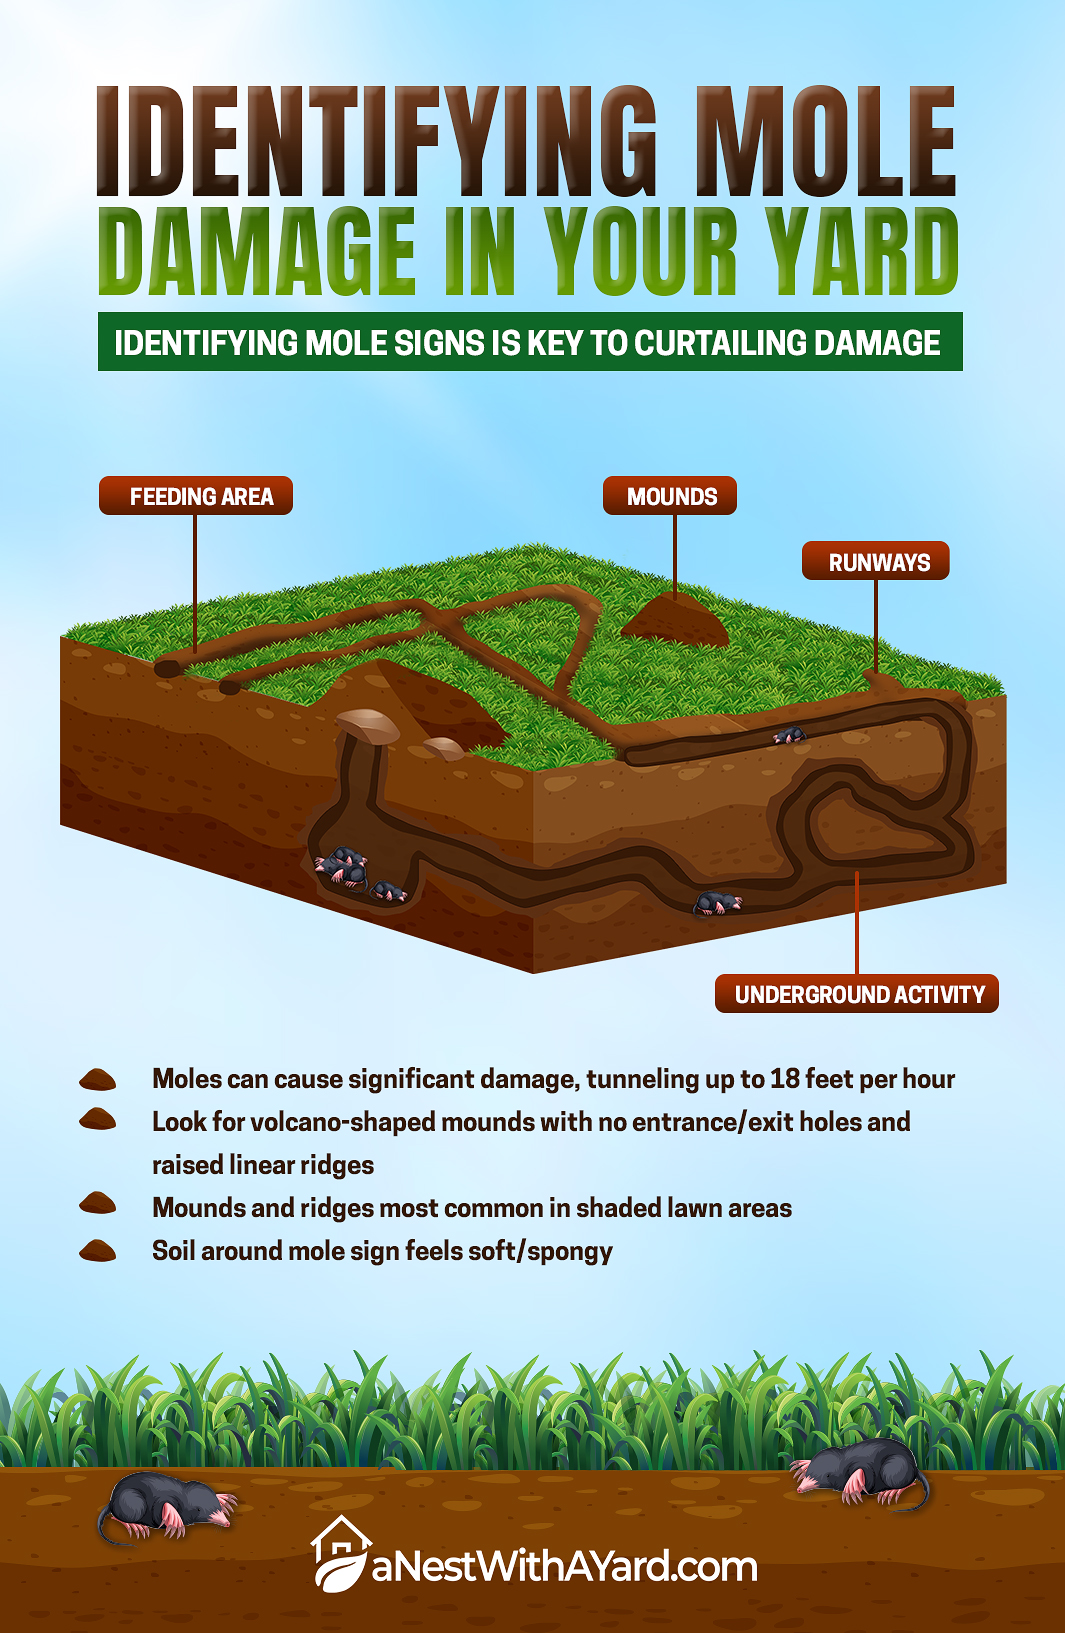 Infographic depicting mole damage in your yard